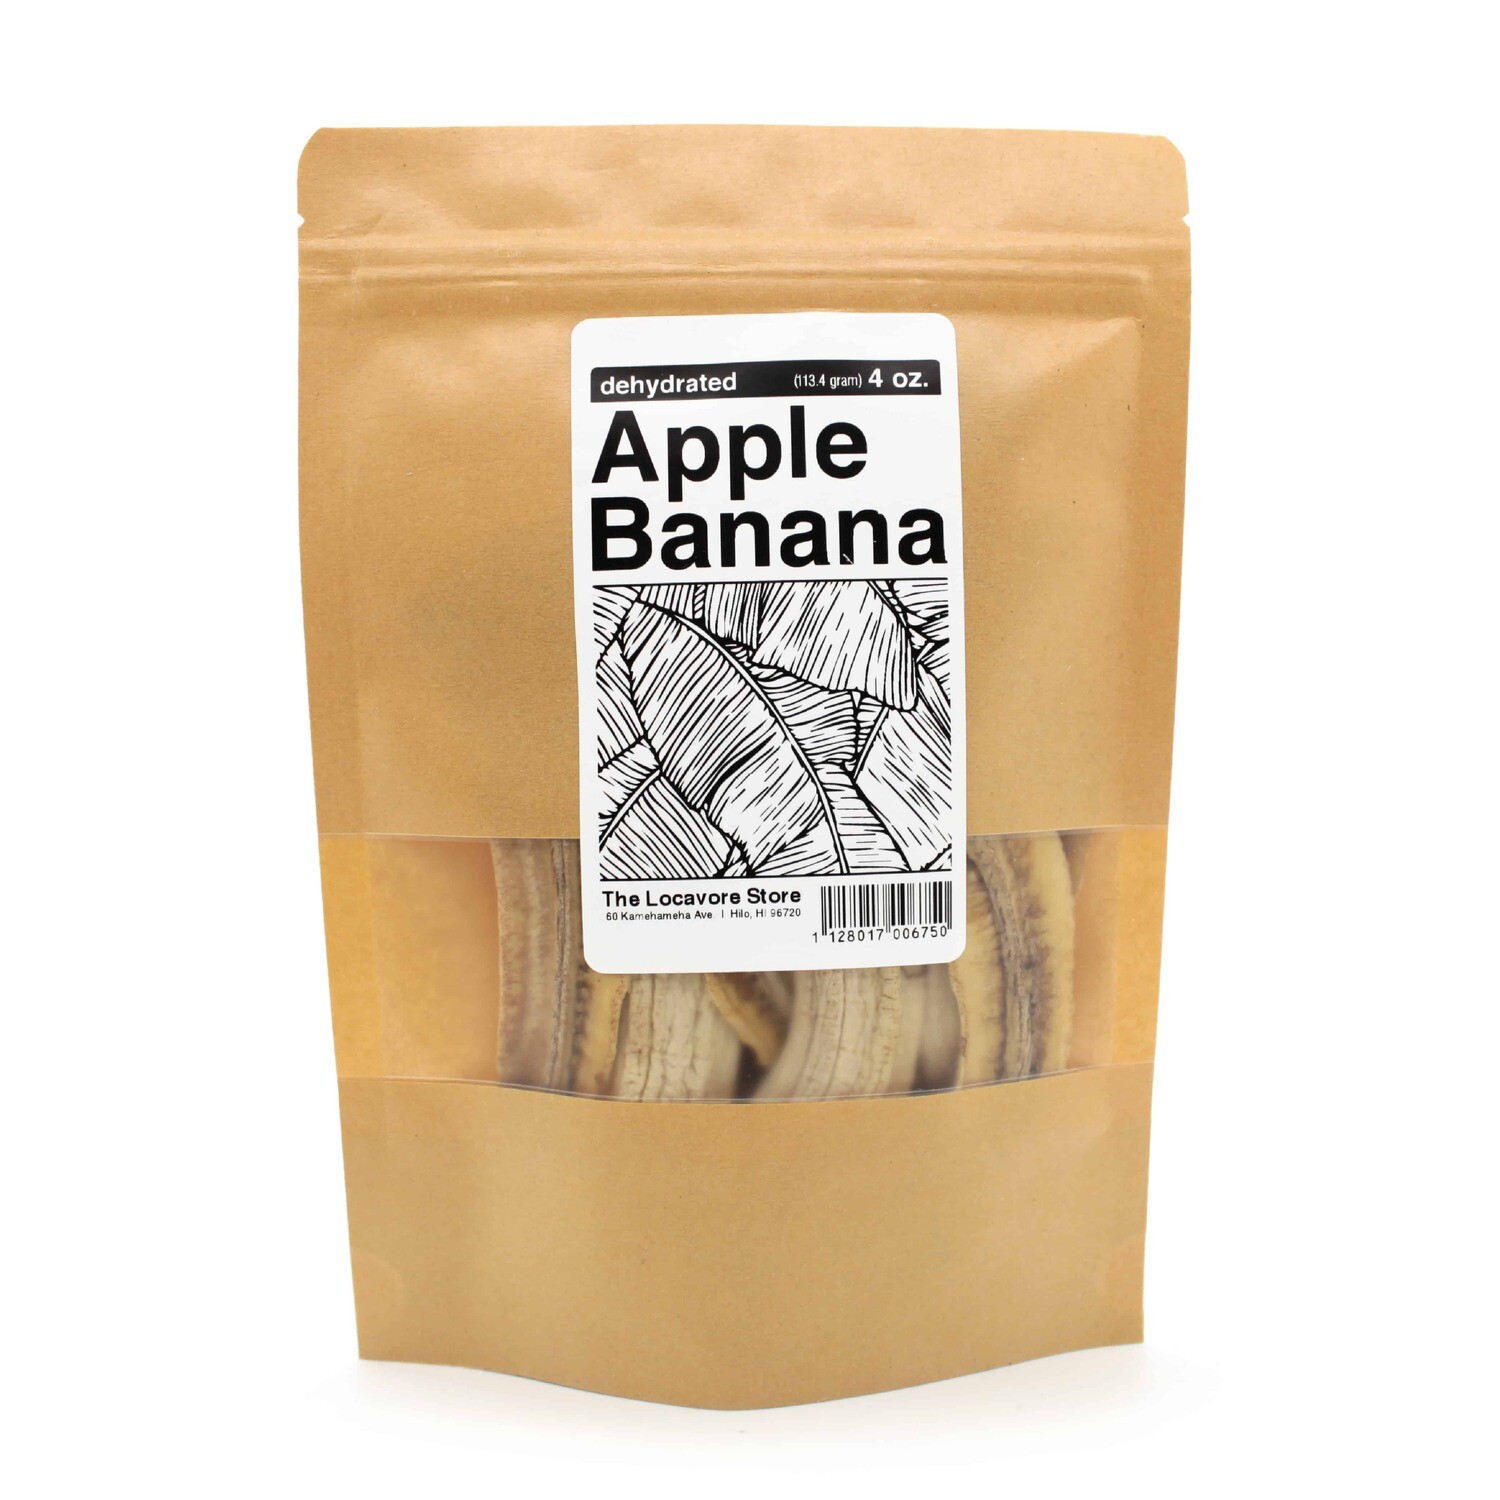 Dried Fruit, The Locavore Store - Apple Banana (4 Oz.)